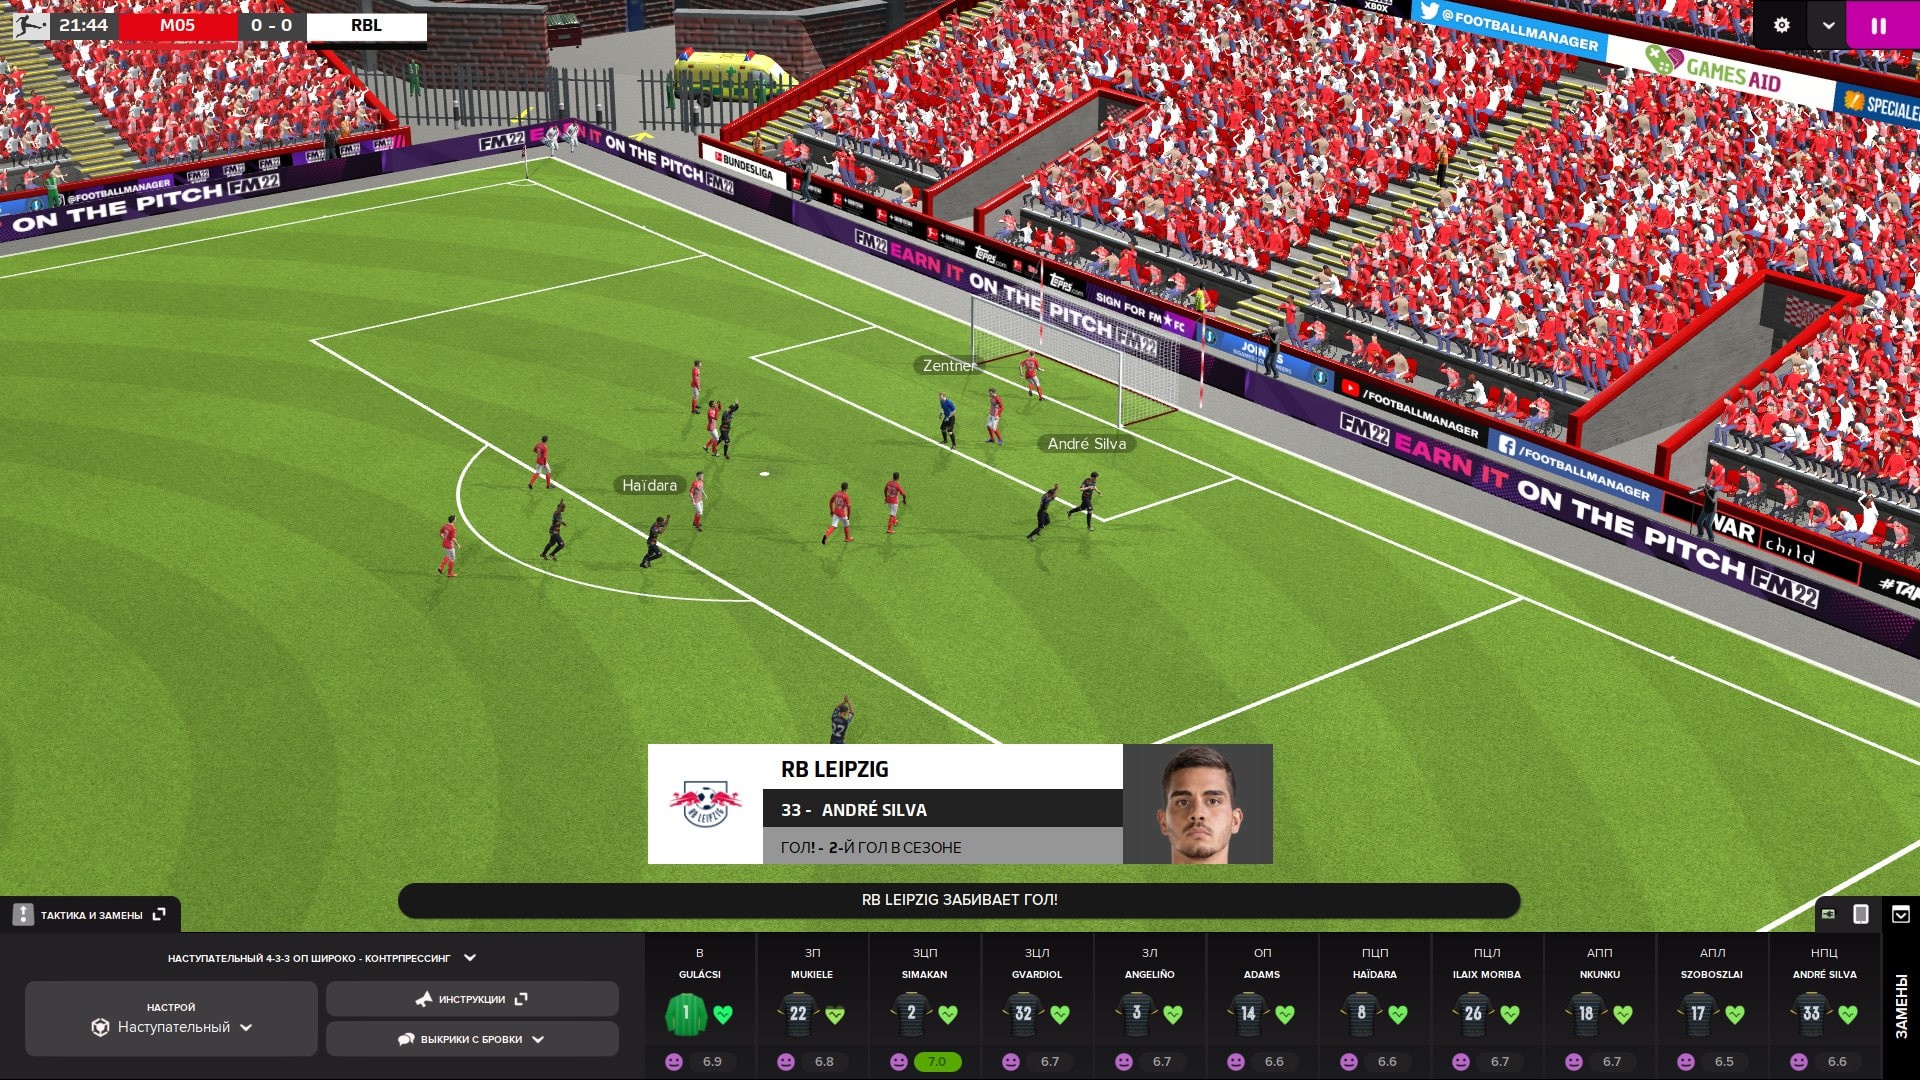 Football Manager 2022 for macOS 中文版,Football Manager,Football Manager中文版,Football Manager中文官网,Football Manager官网,Football Manager正版下载,Football Manager正版限免,Football Manager破解版,Football Manager注册版,Football Manager注册码,Football Manager免费下载,Football Manager下载,Football Manager激活版下载,Football Manager中文版下载,Football Manager专业版,Football Manager中文专业版下载